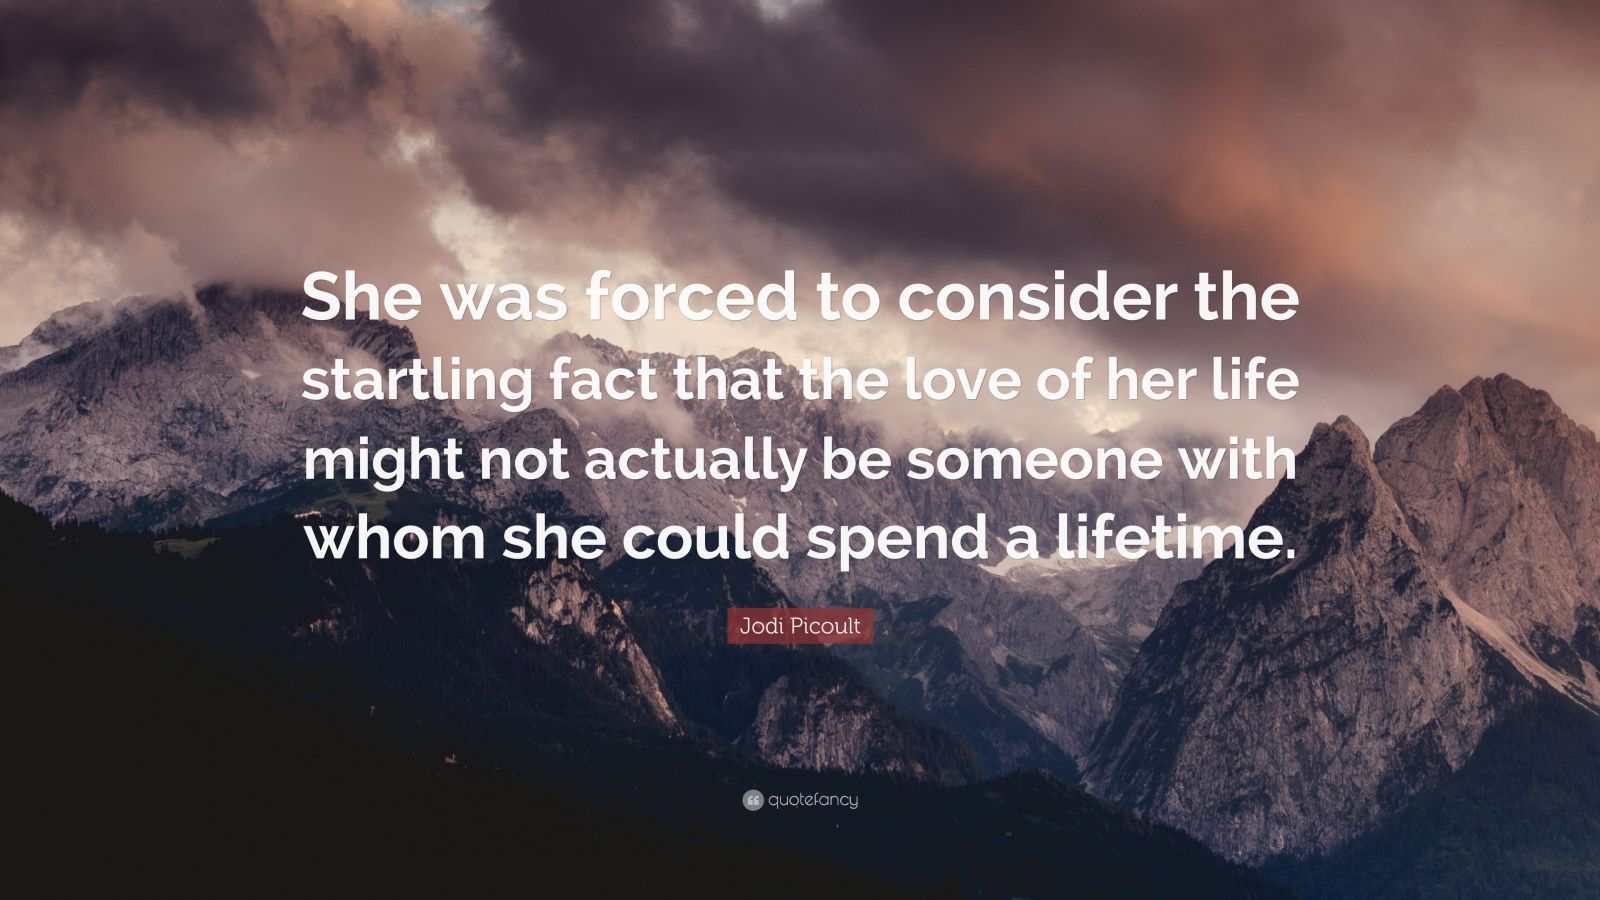 Jodi Picoult Quote: “She was forced to consider the startling fact that ...